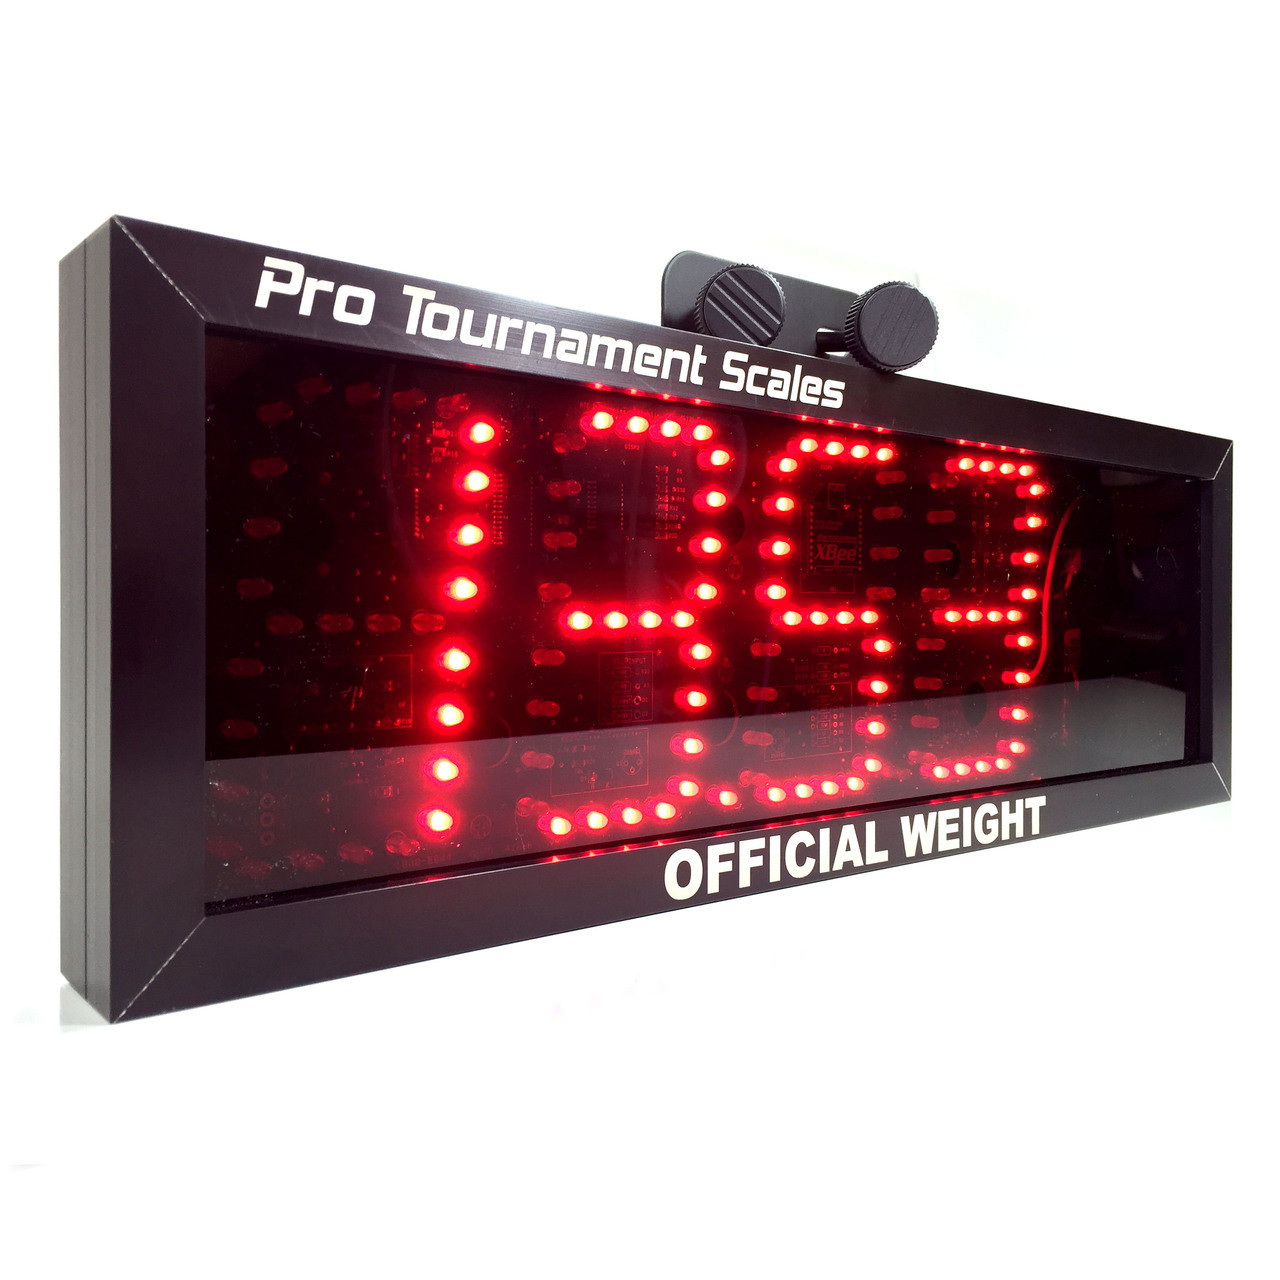 https://cdn11.bigcommerce.com/s-190w8a8x/images/stencil/1280x1280/products/158/714/Front_view_of_4_inch_LED_Scale_Display__12924.1510843202.jpg?c=2